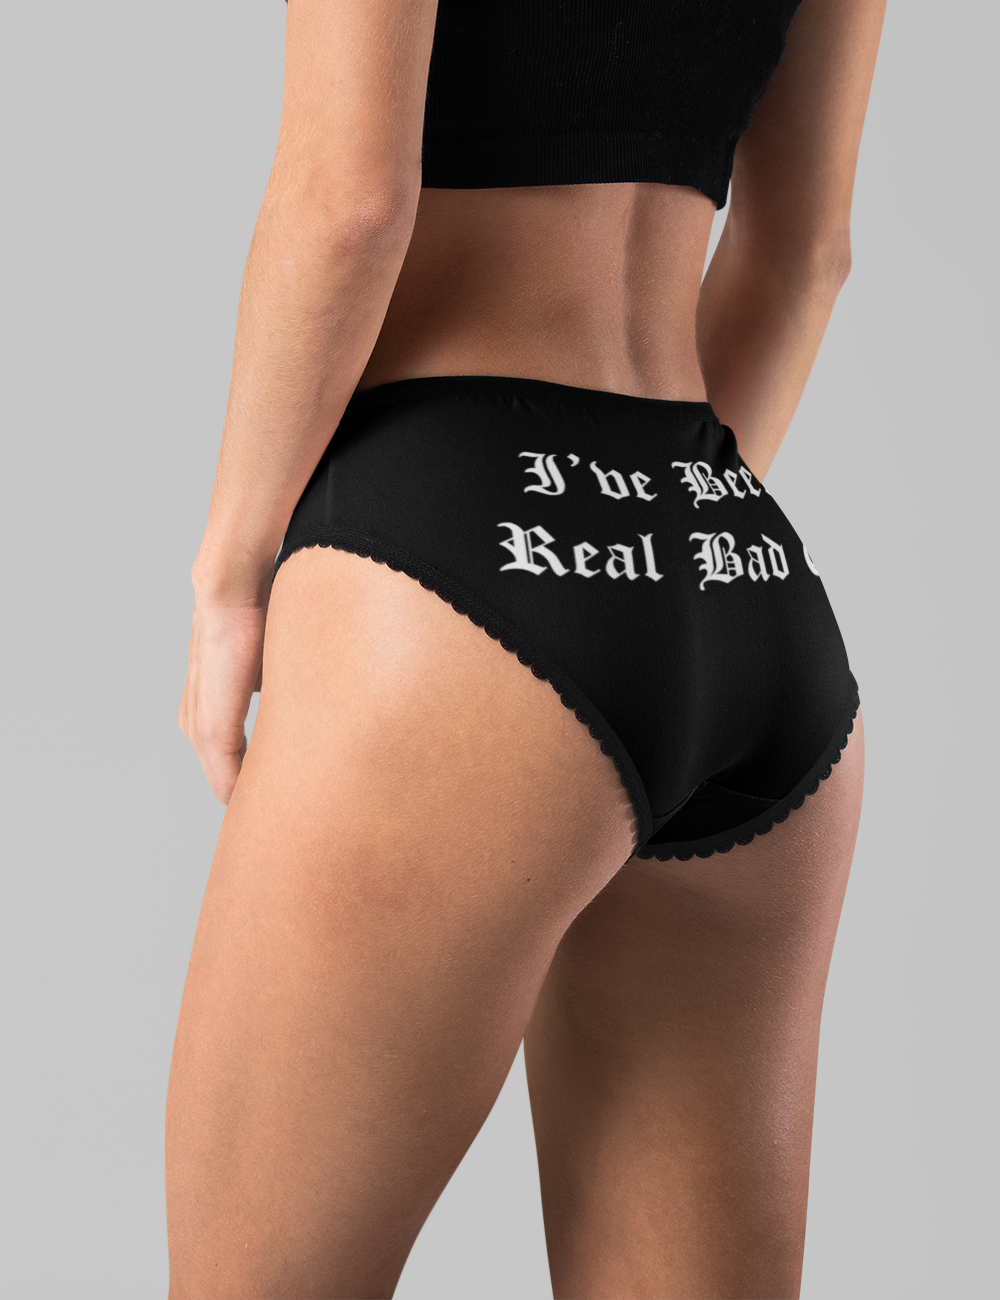 I've Been A Real Bad Girl | Women's Intimate Briefs OniTakai